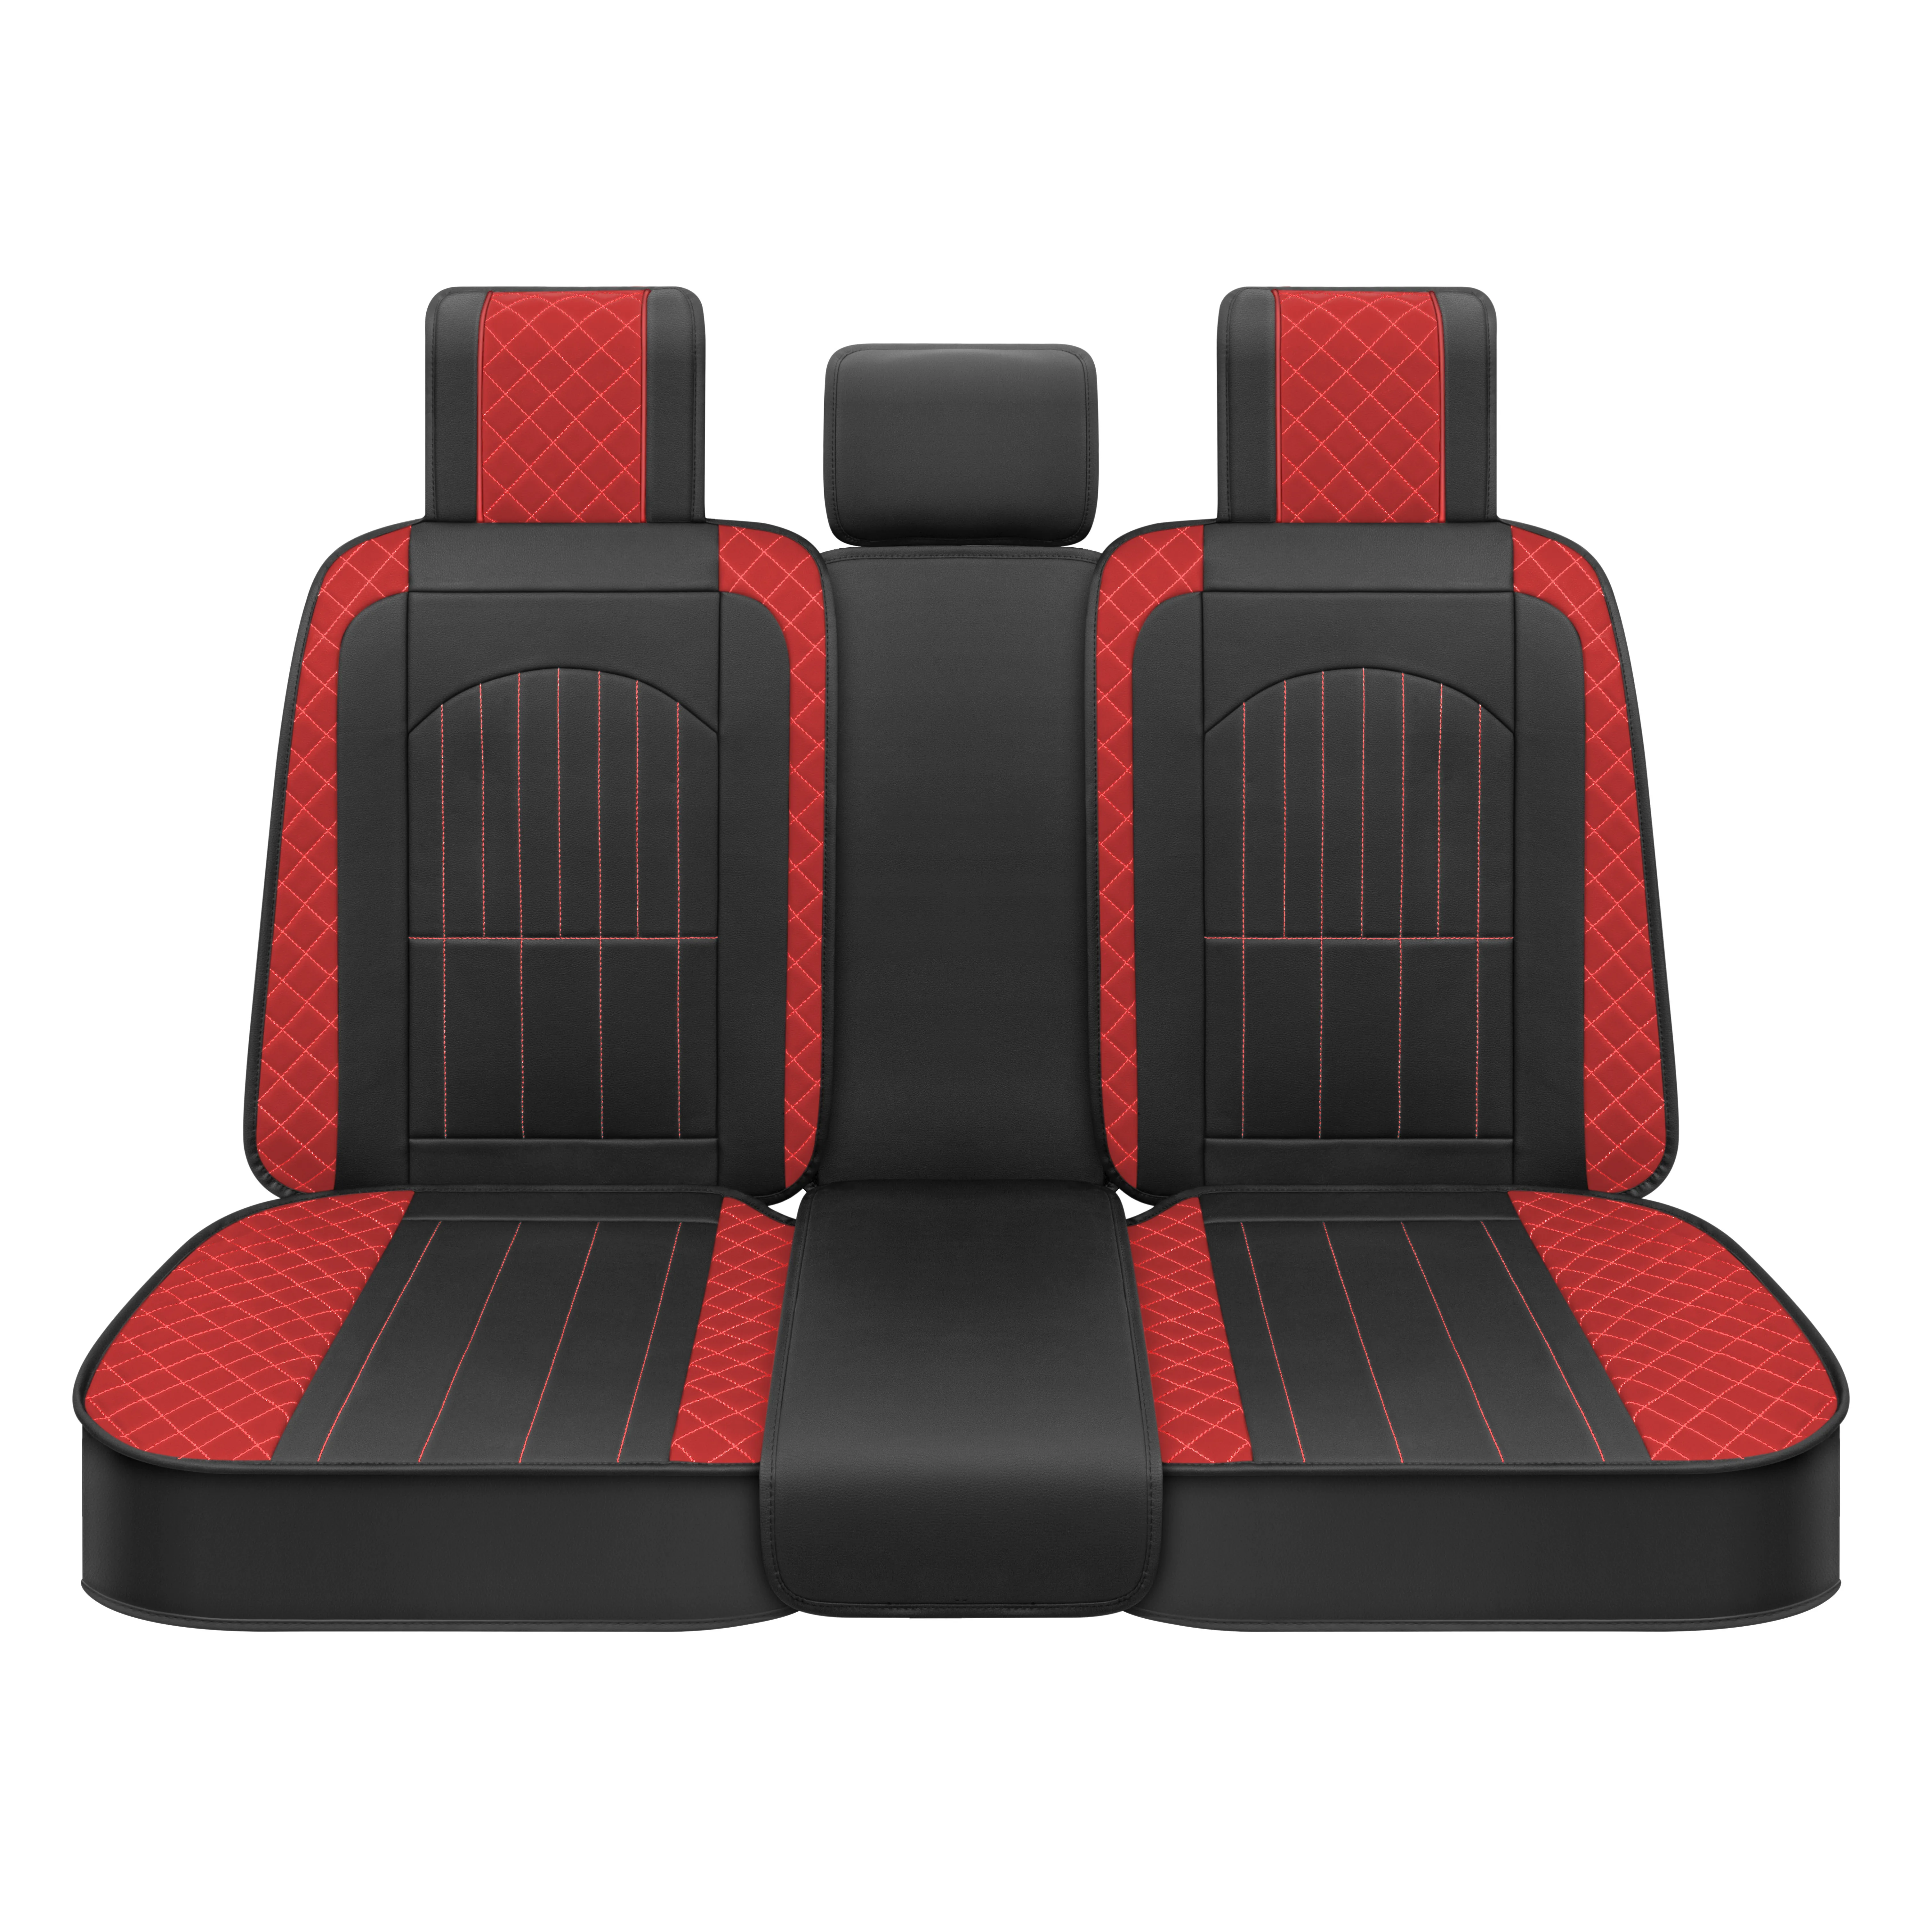 Premium Design Car Seat Covers 5 Pieces Full Set Universal Seat Covers for Cars